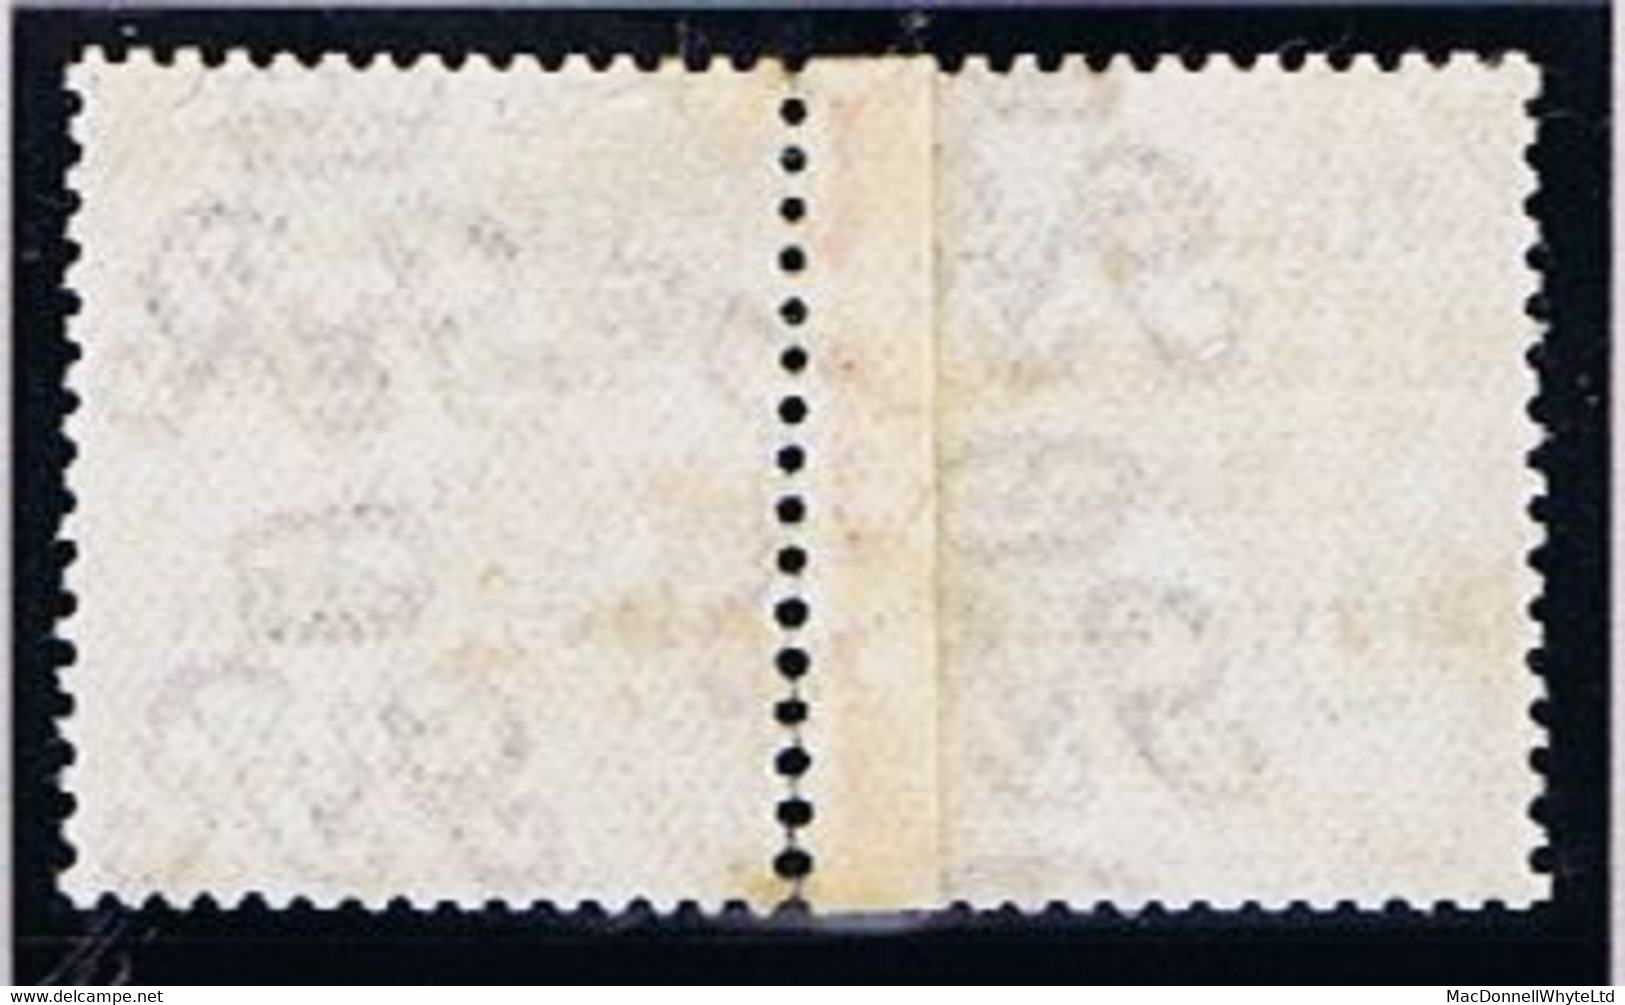 Ireland 1922 Harrison Rialtas Coils 2d Die 1 Horiz Coil Join Pair, Used Contemporary DROMOD Cds, Faint Stain - Used Stamps